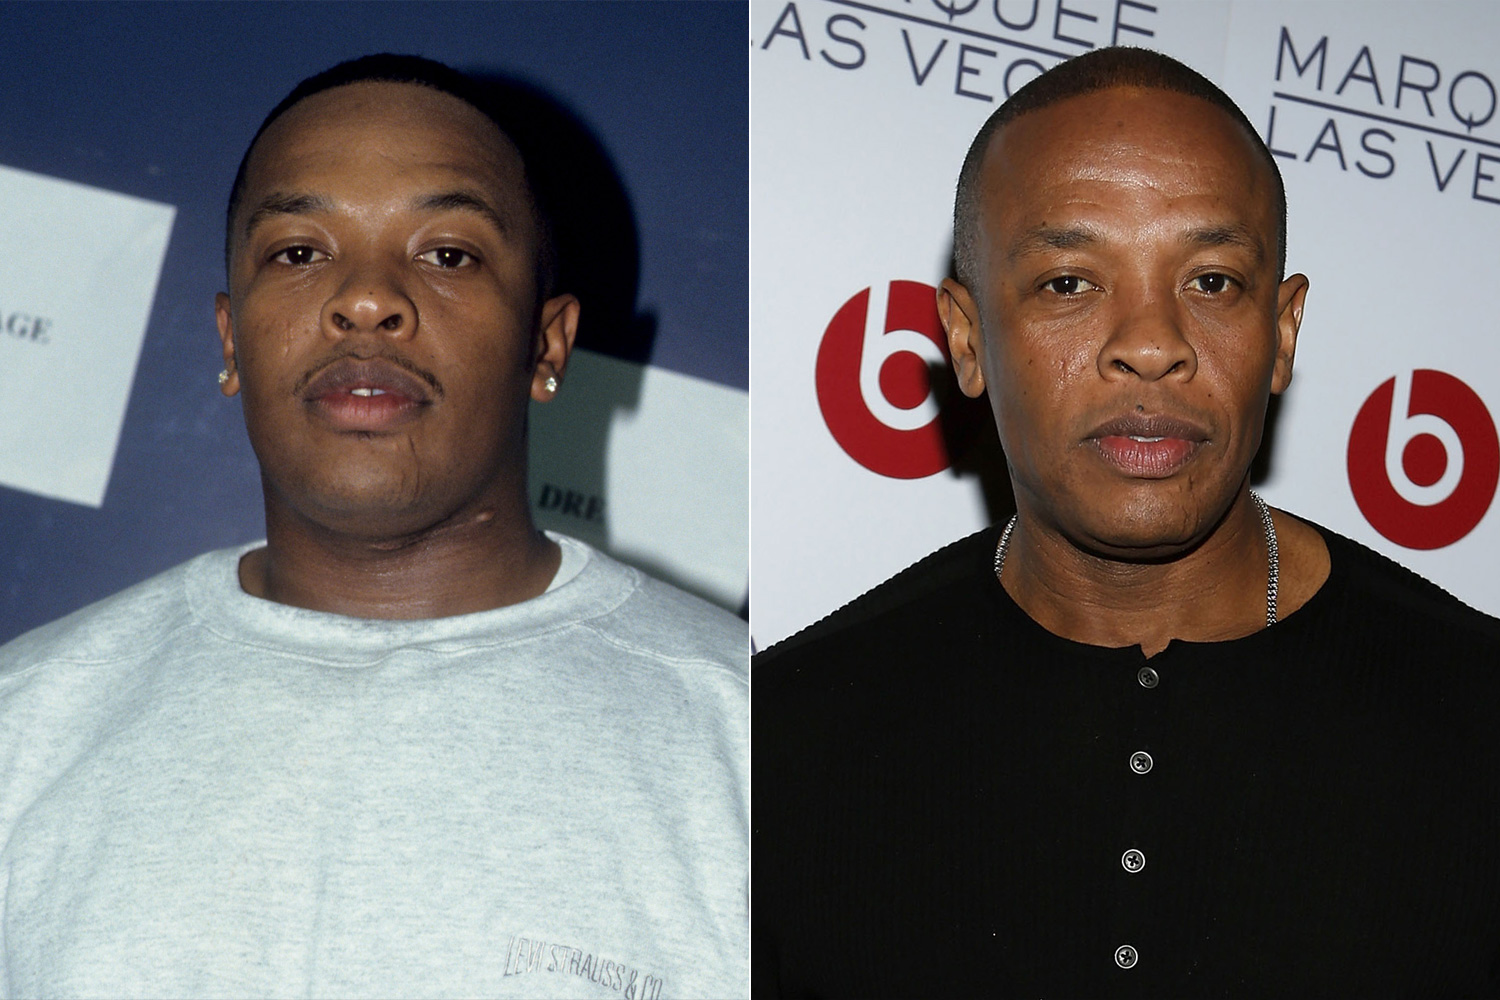 Dre (Andre Romelle Young) struck out on his own after the group's final album, Niggaz4Life, dropped in 1991. He had a successful solo career before shifting to focus largely on production, mentoring up-and-coming artists including Eminem and 50 Cent. His signature line of headphones,  Beats By Dre,  was recently acquired by Apple.